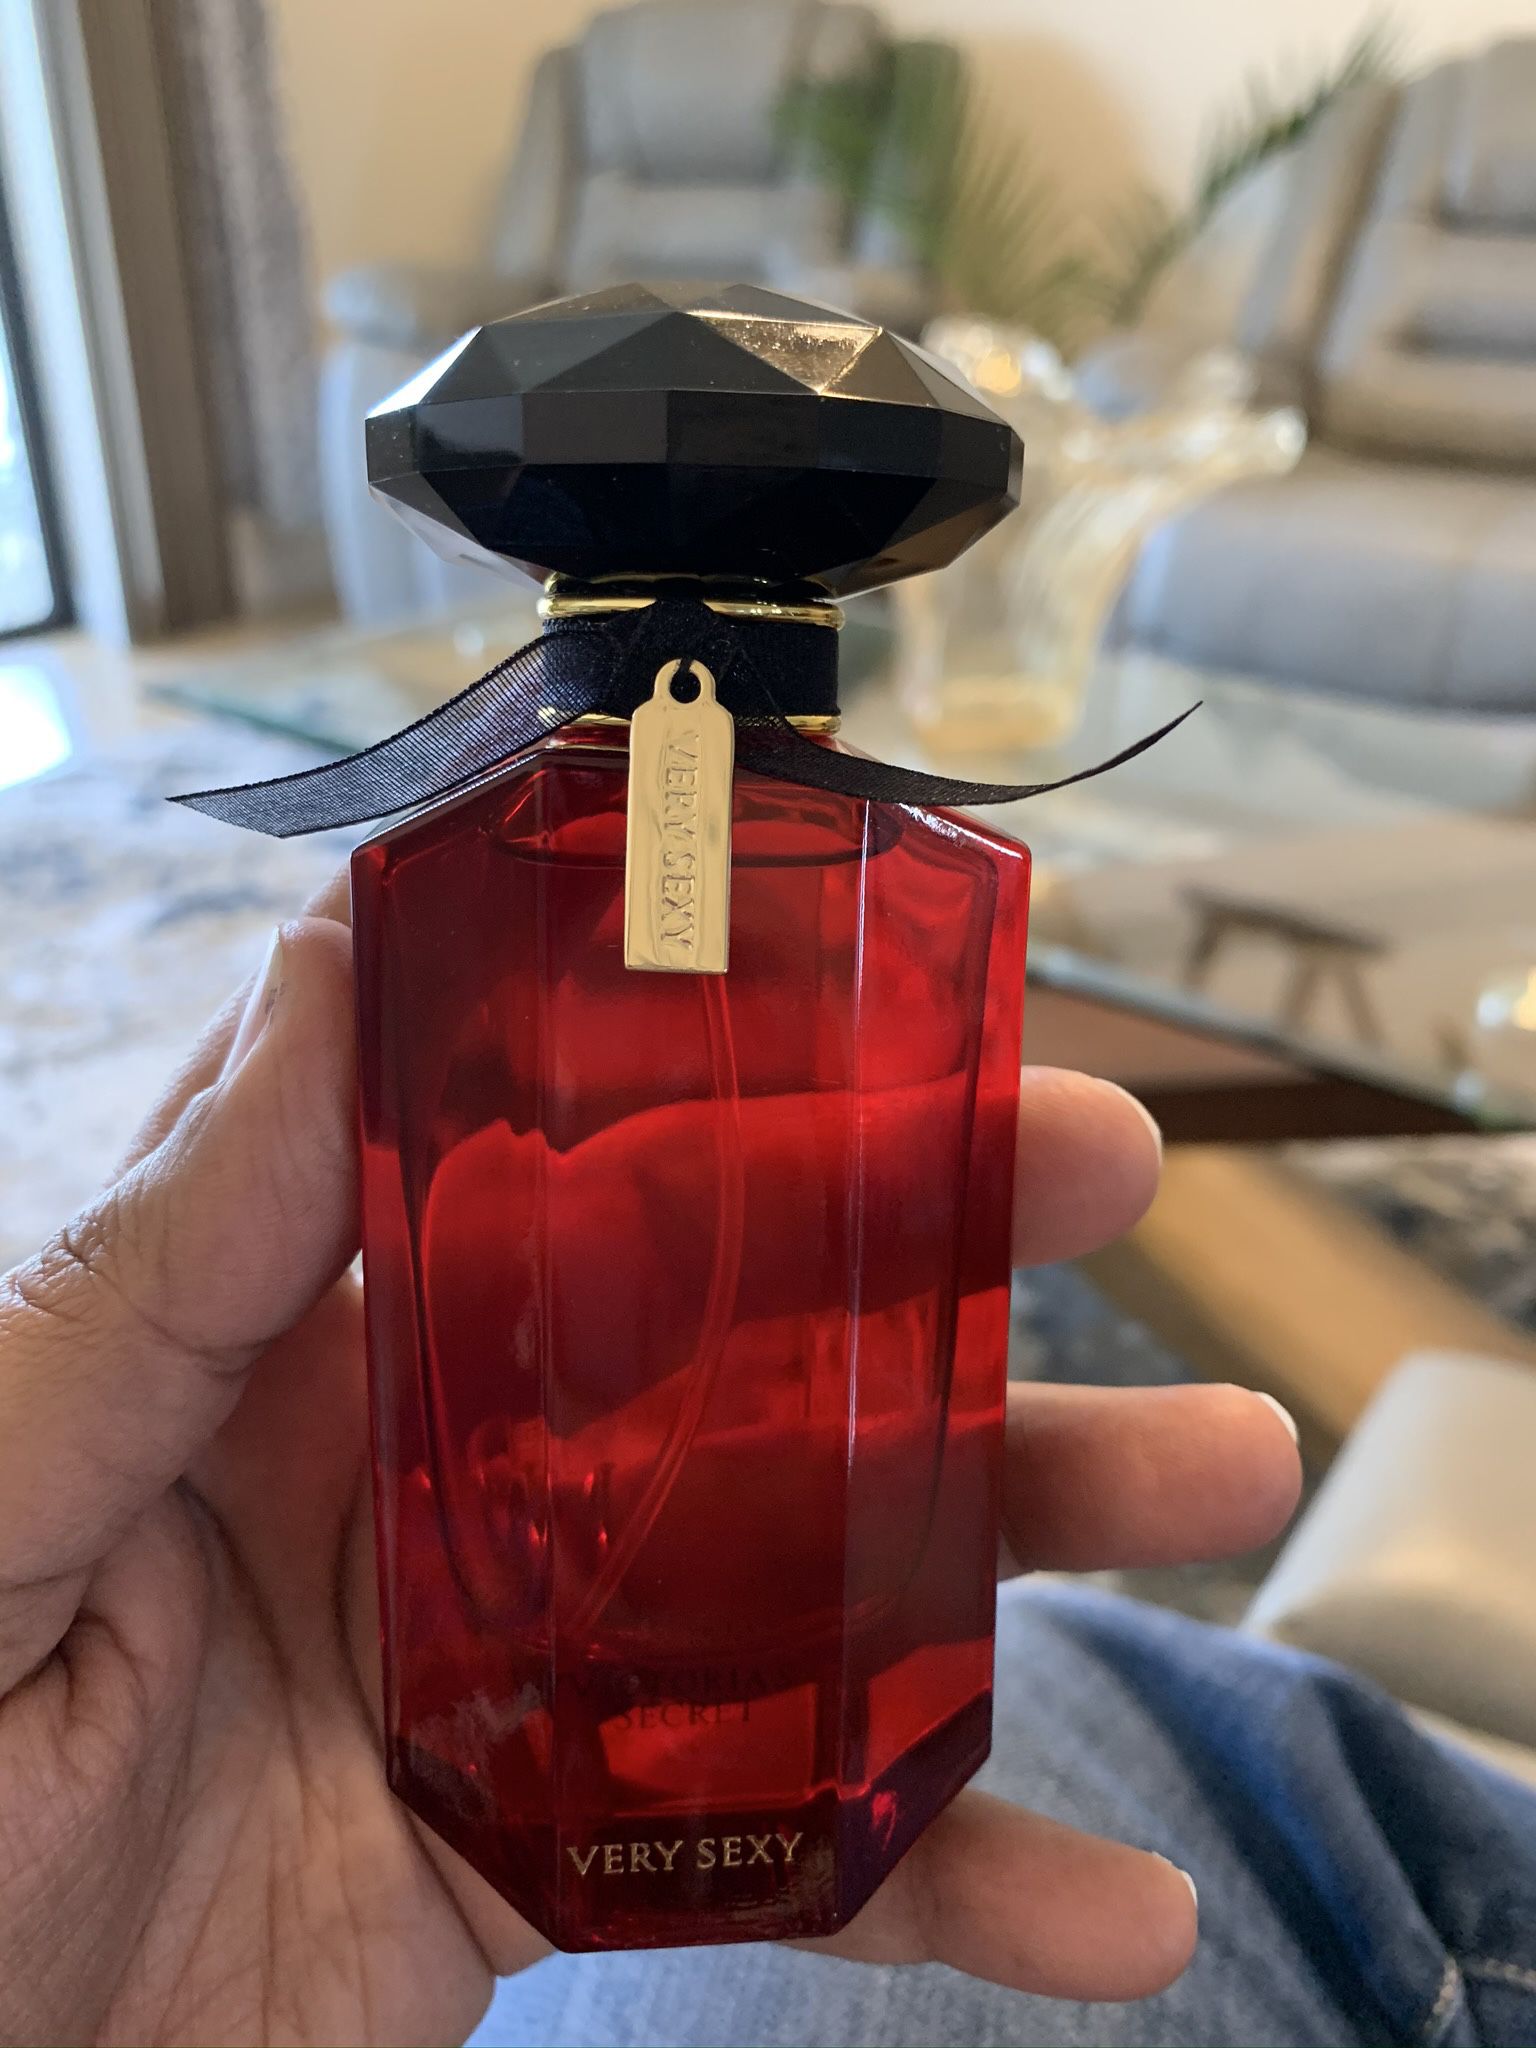 Victoria’s Secret very sexy perfume for her